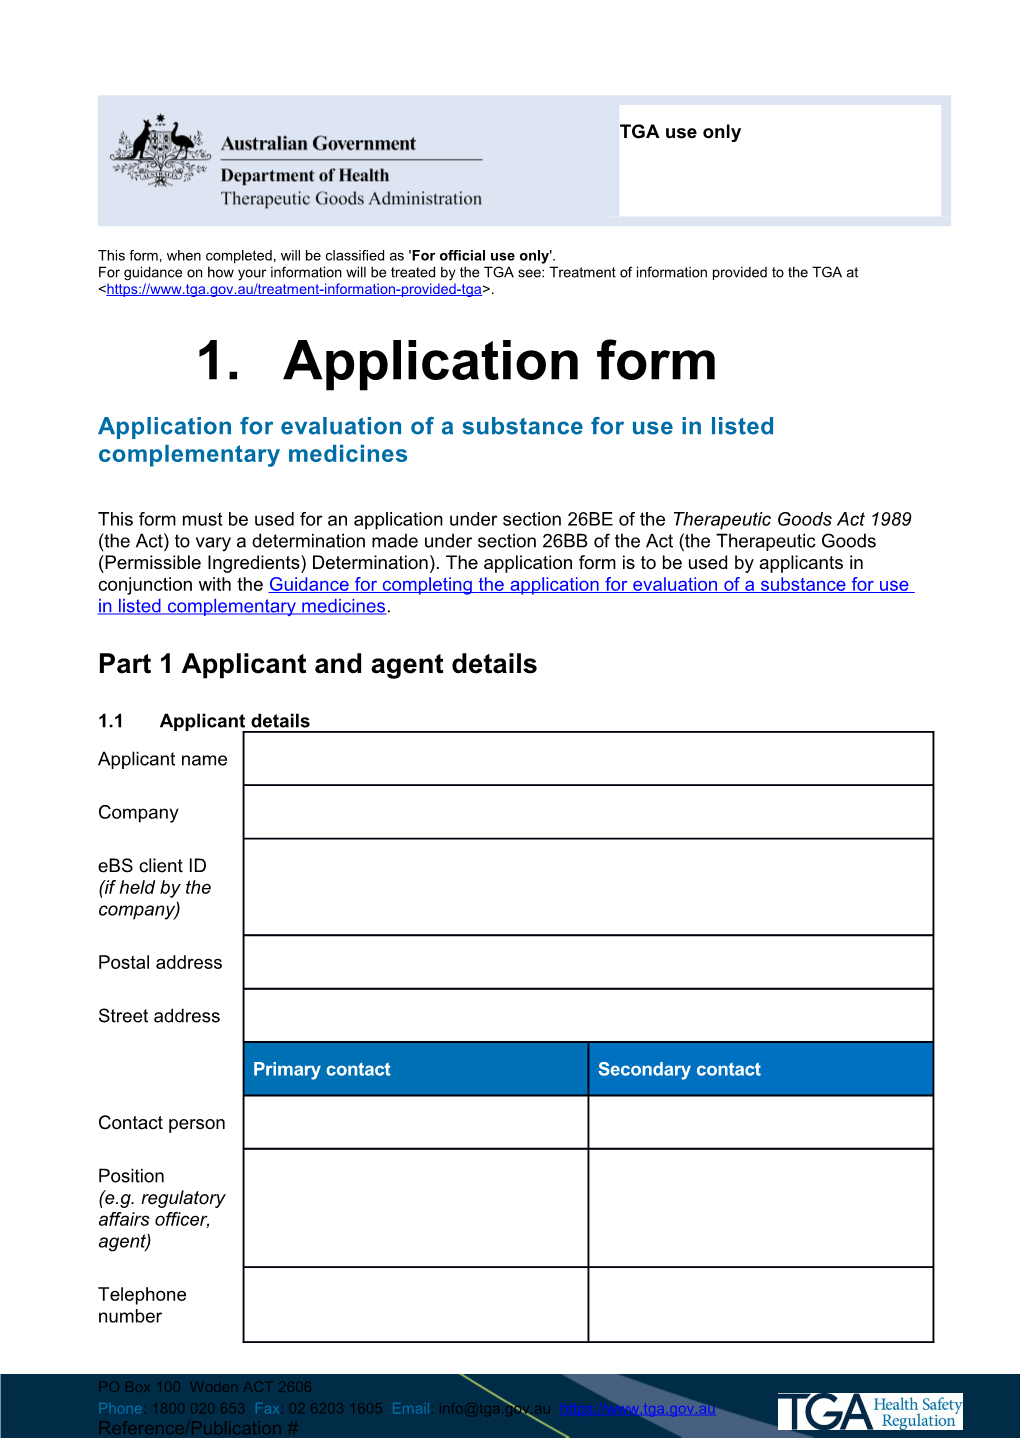 Application Form for Evaluation of a Substance for Use in Listed Complementary Medicines